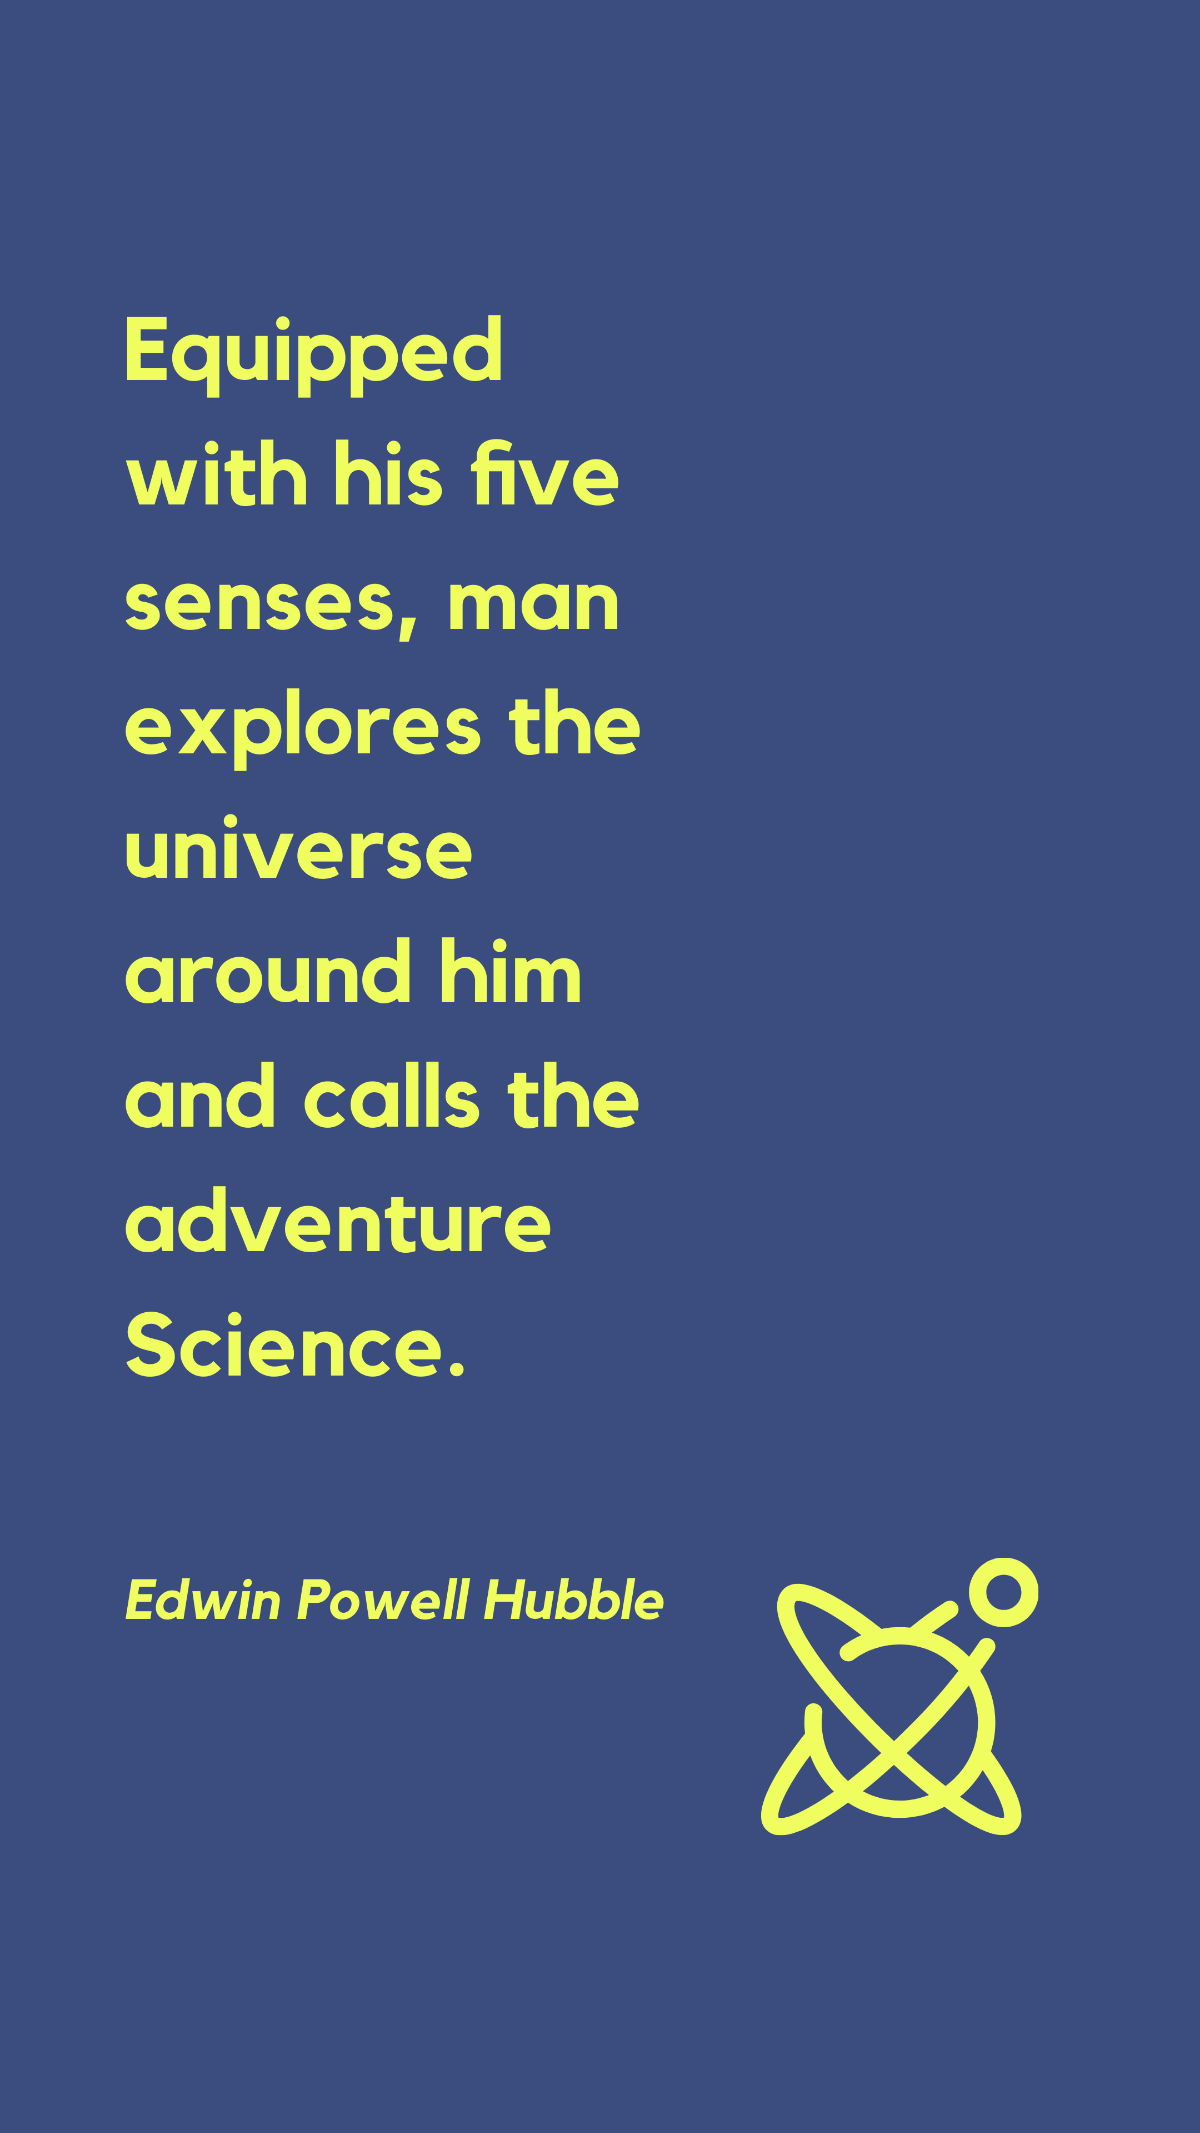 Edwin Powell Hubble - Equipped with his five senses, man explores the universe around him and calls the adventure Science.